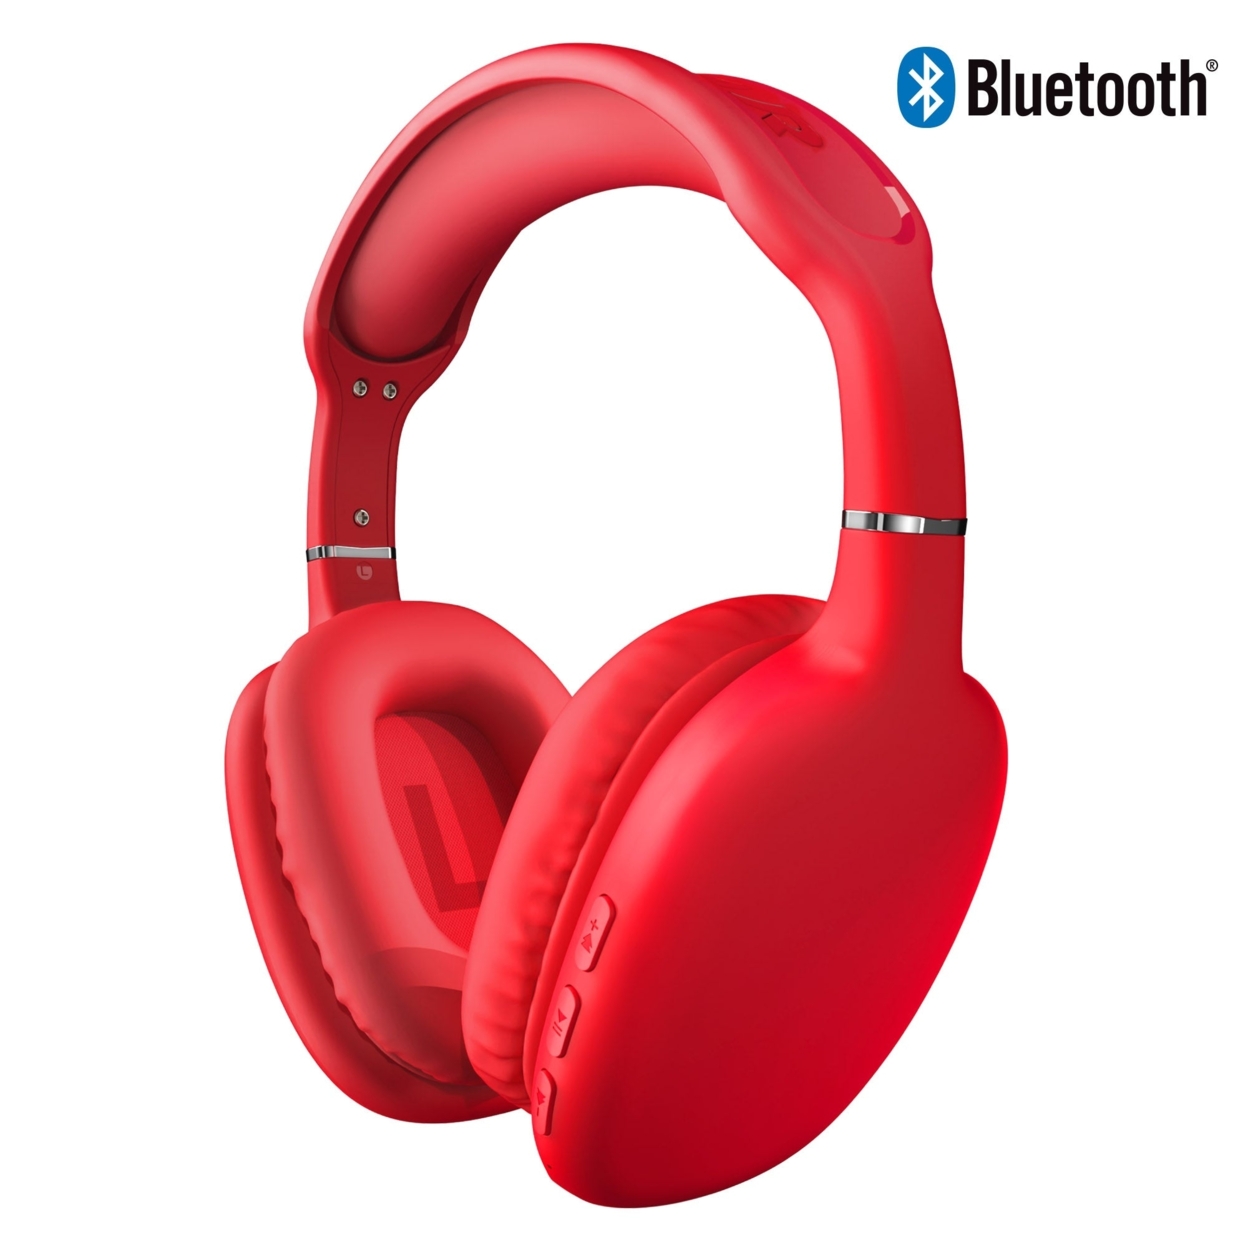 HyperGear VIBE Wireless Bluetooth Headphones W Extended Battery Life (VIBE-PRNT) - Red